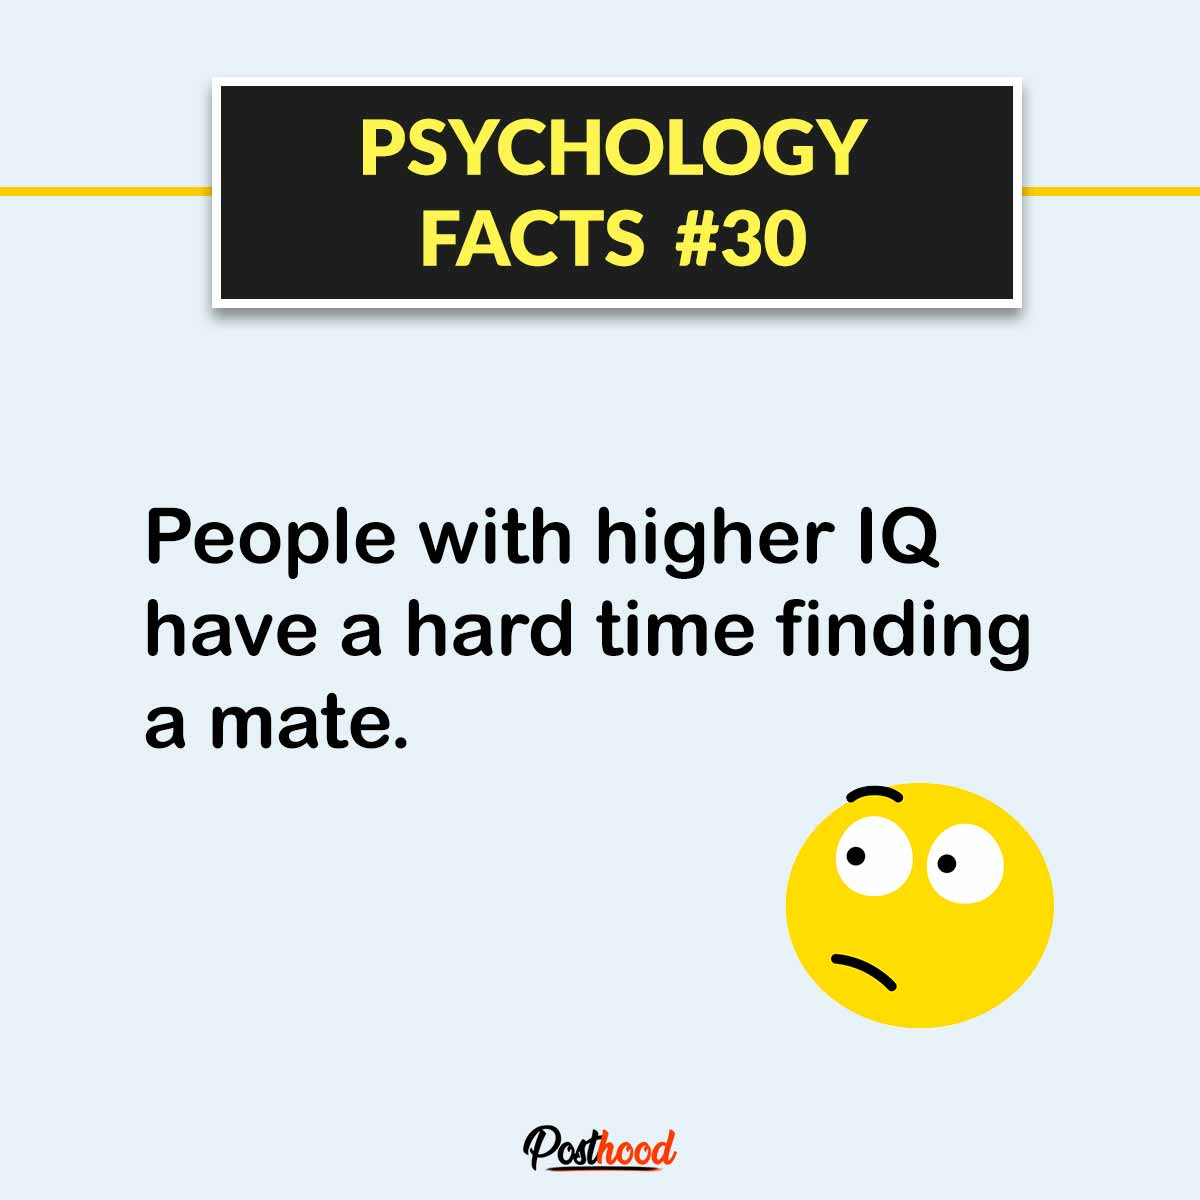 100 cool and crazy Psychological facts about human mind, behavior, and personality. Give yourself this fun read if love to know people’s mind. 